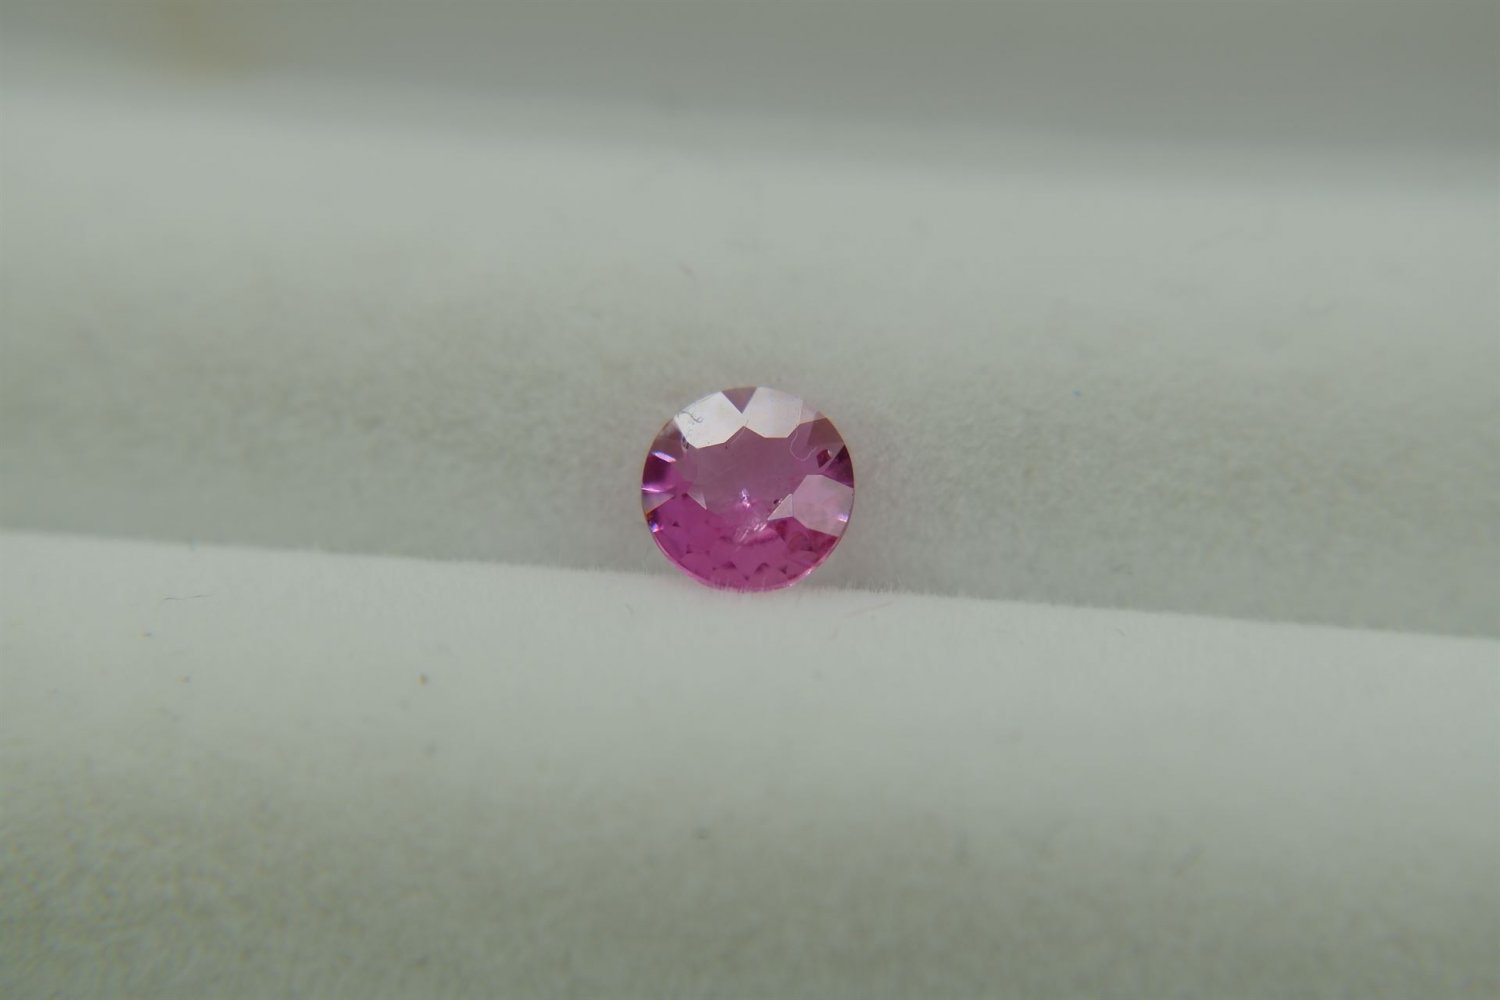 0.55 ct  Strong Pink Sapphire,handcrafted cut premium handcrafted checkerboard table, oval antique c